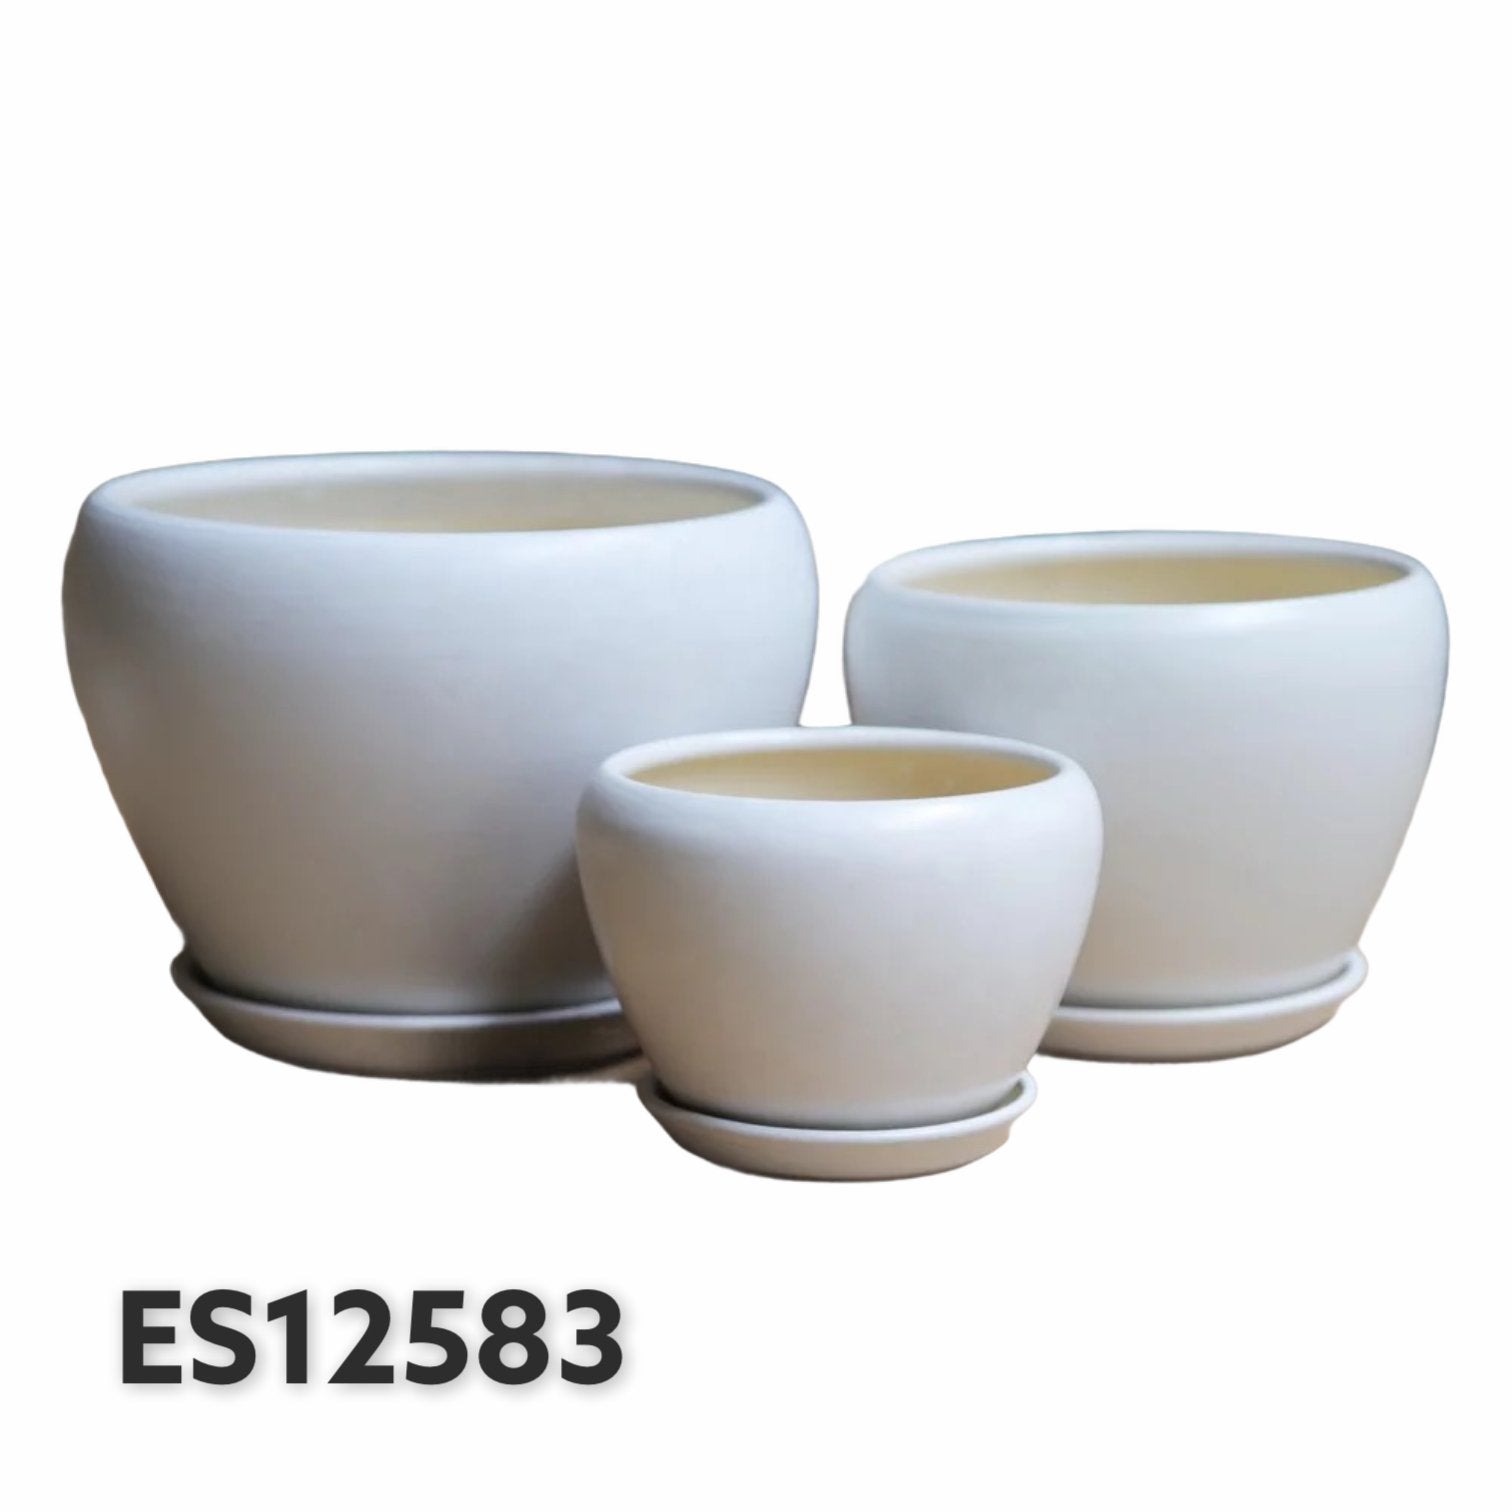 ES-1258 Round Glazed Clay Ceramic Pot with Catch Plate - Pots For Plants